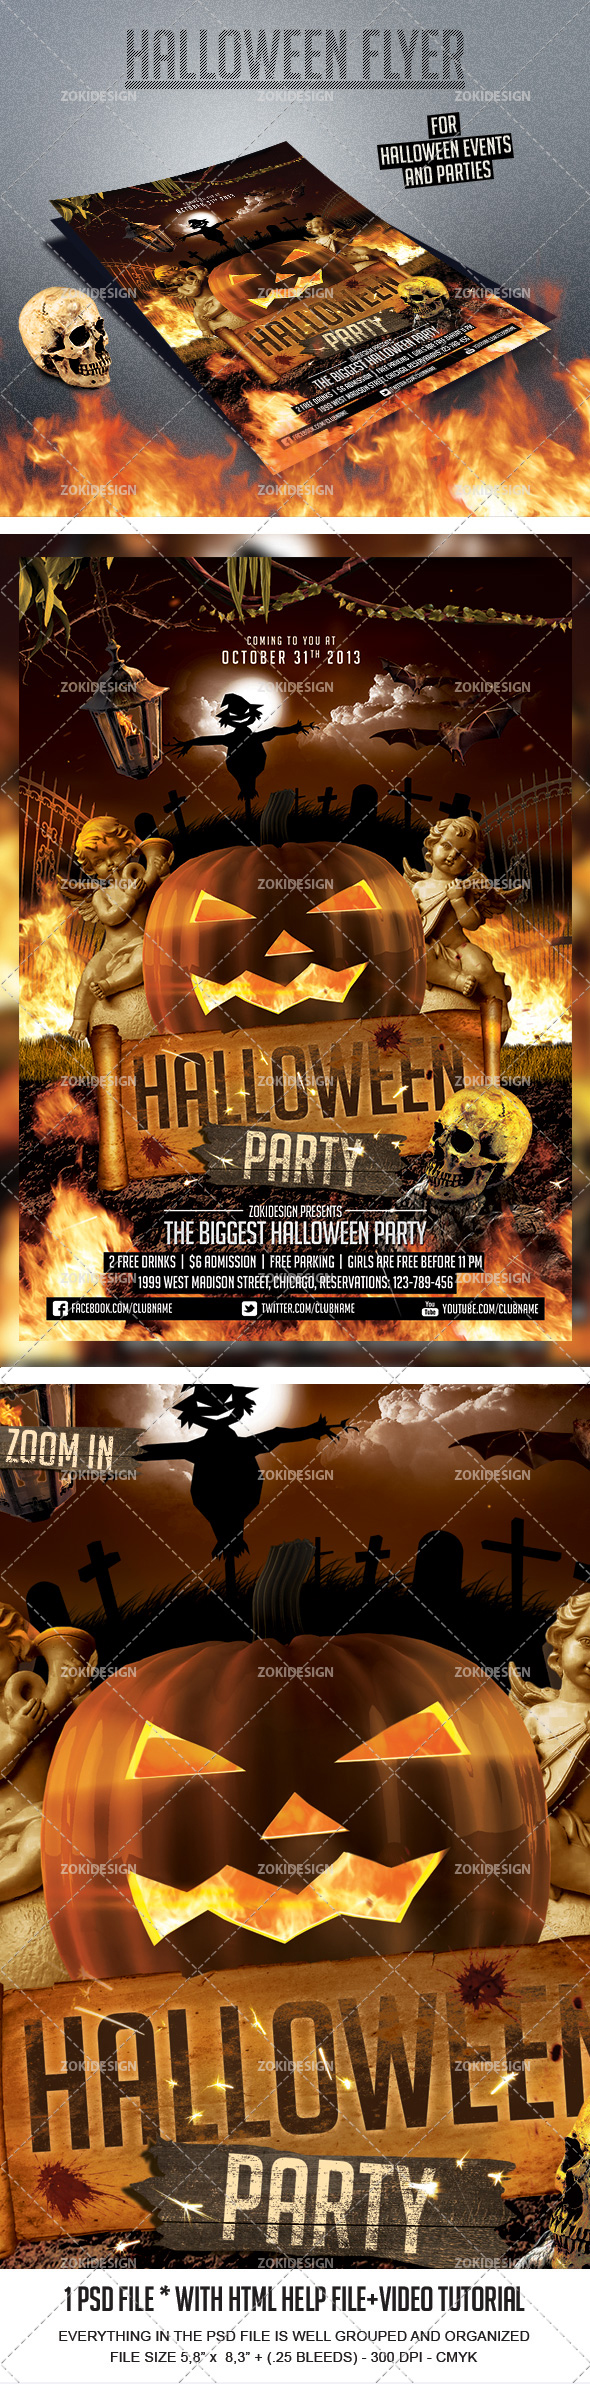 angels autumn Bats crazy Event Poster fire flyer Halloween Halloween party hell horror Hot Invitation leaves moon